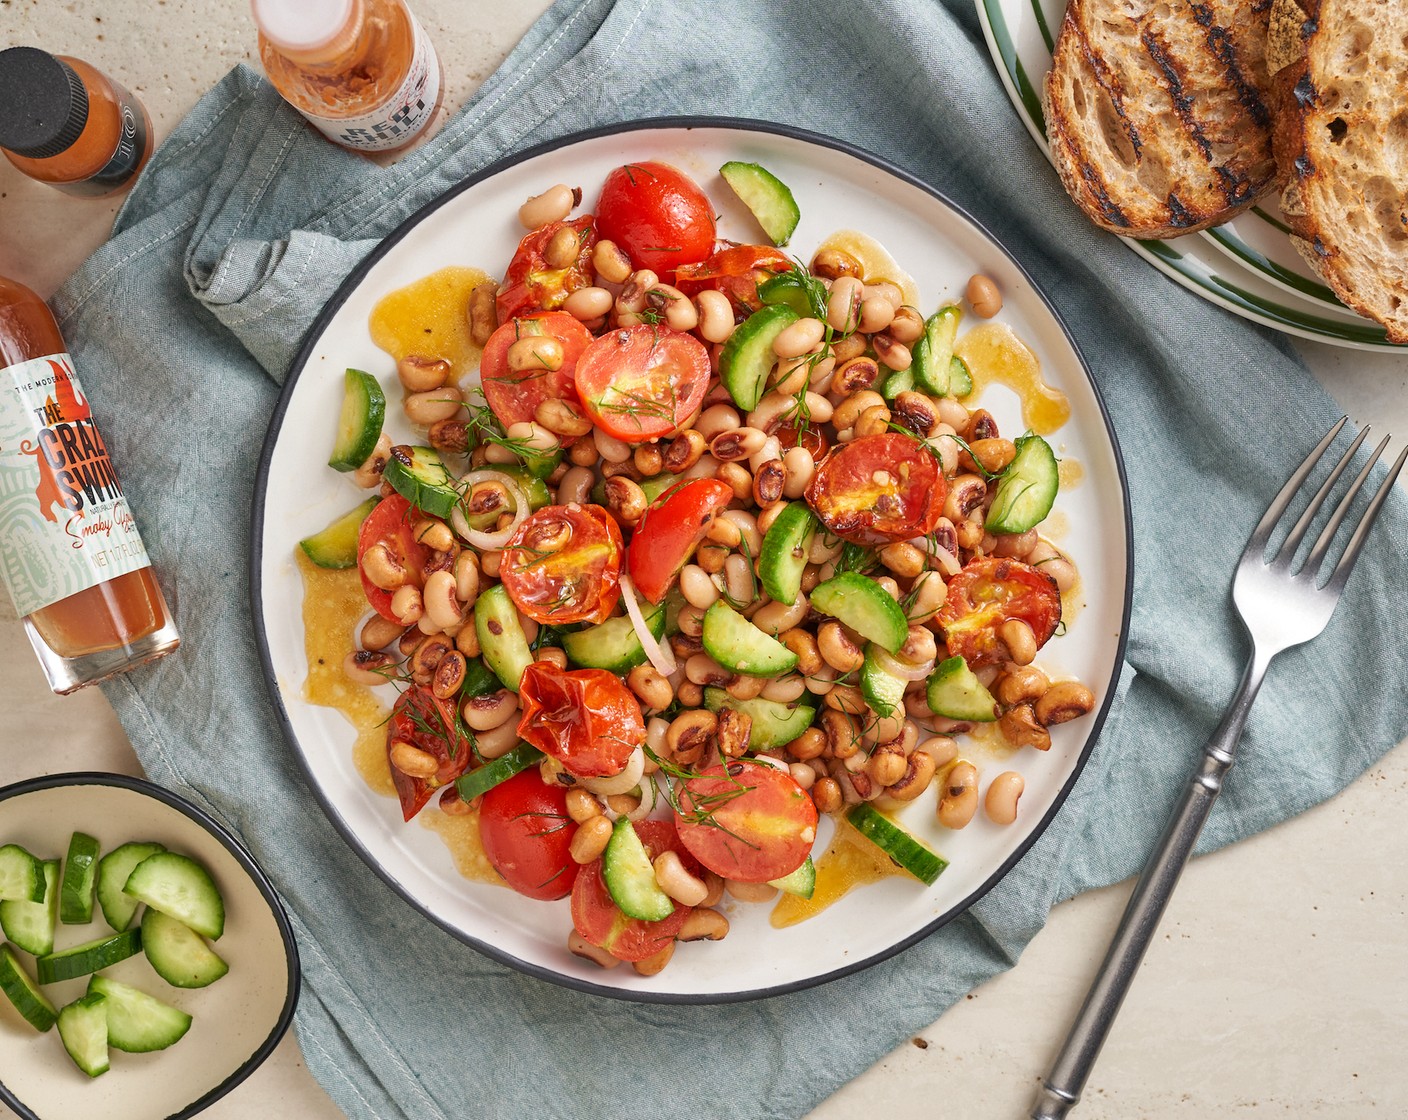 Black-Eyed Pea Salad with Hot Sauce Dressing